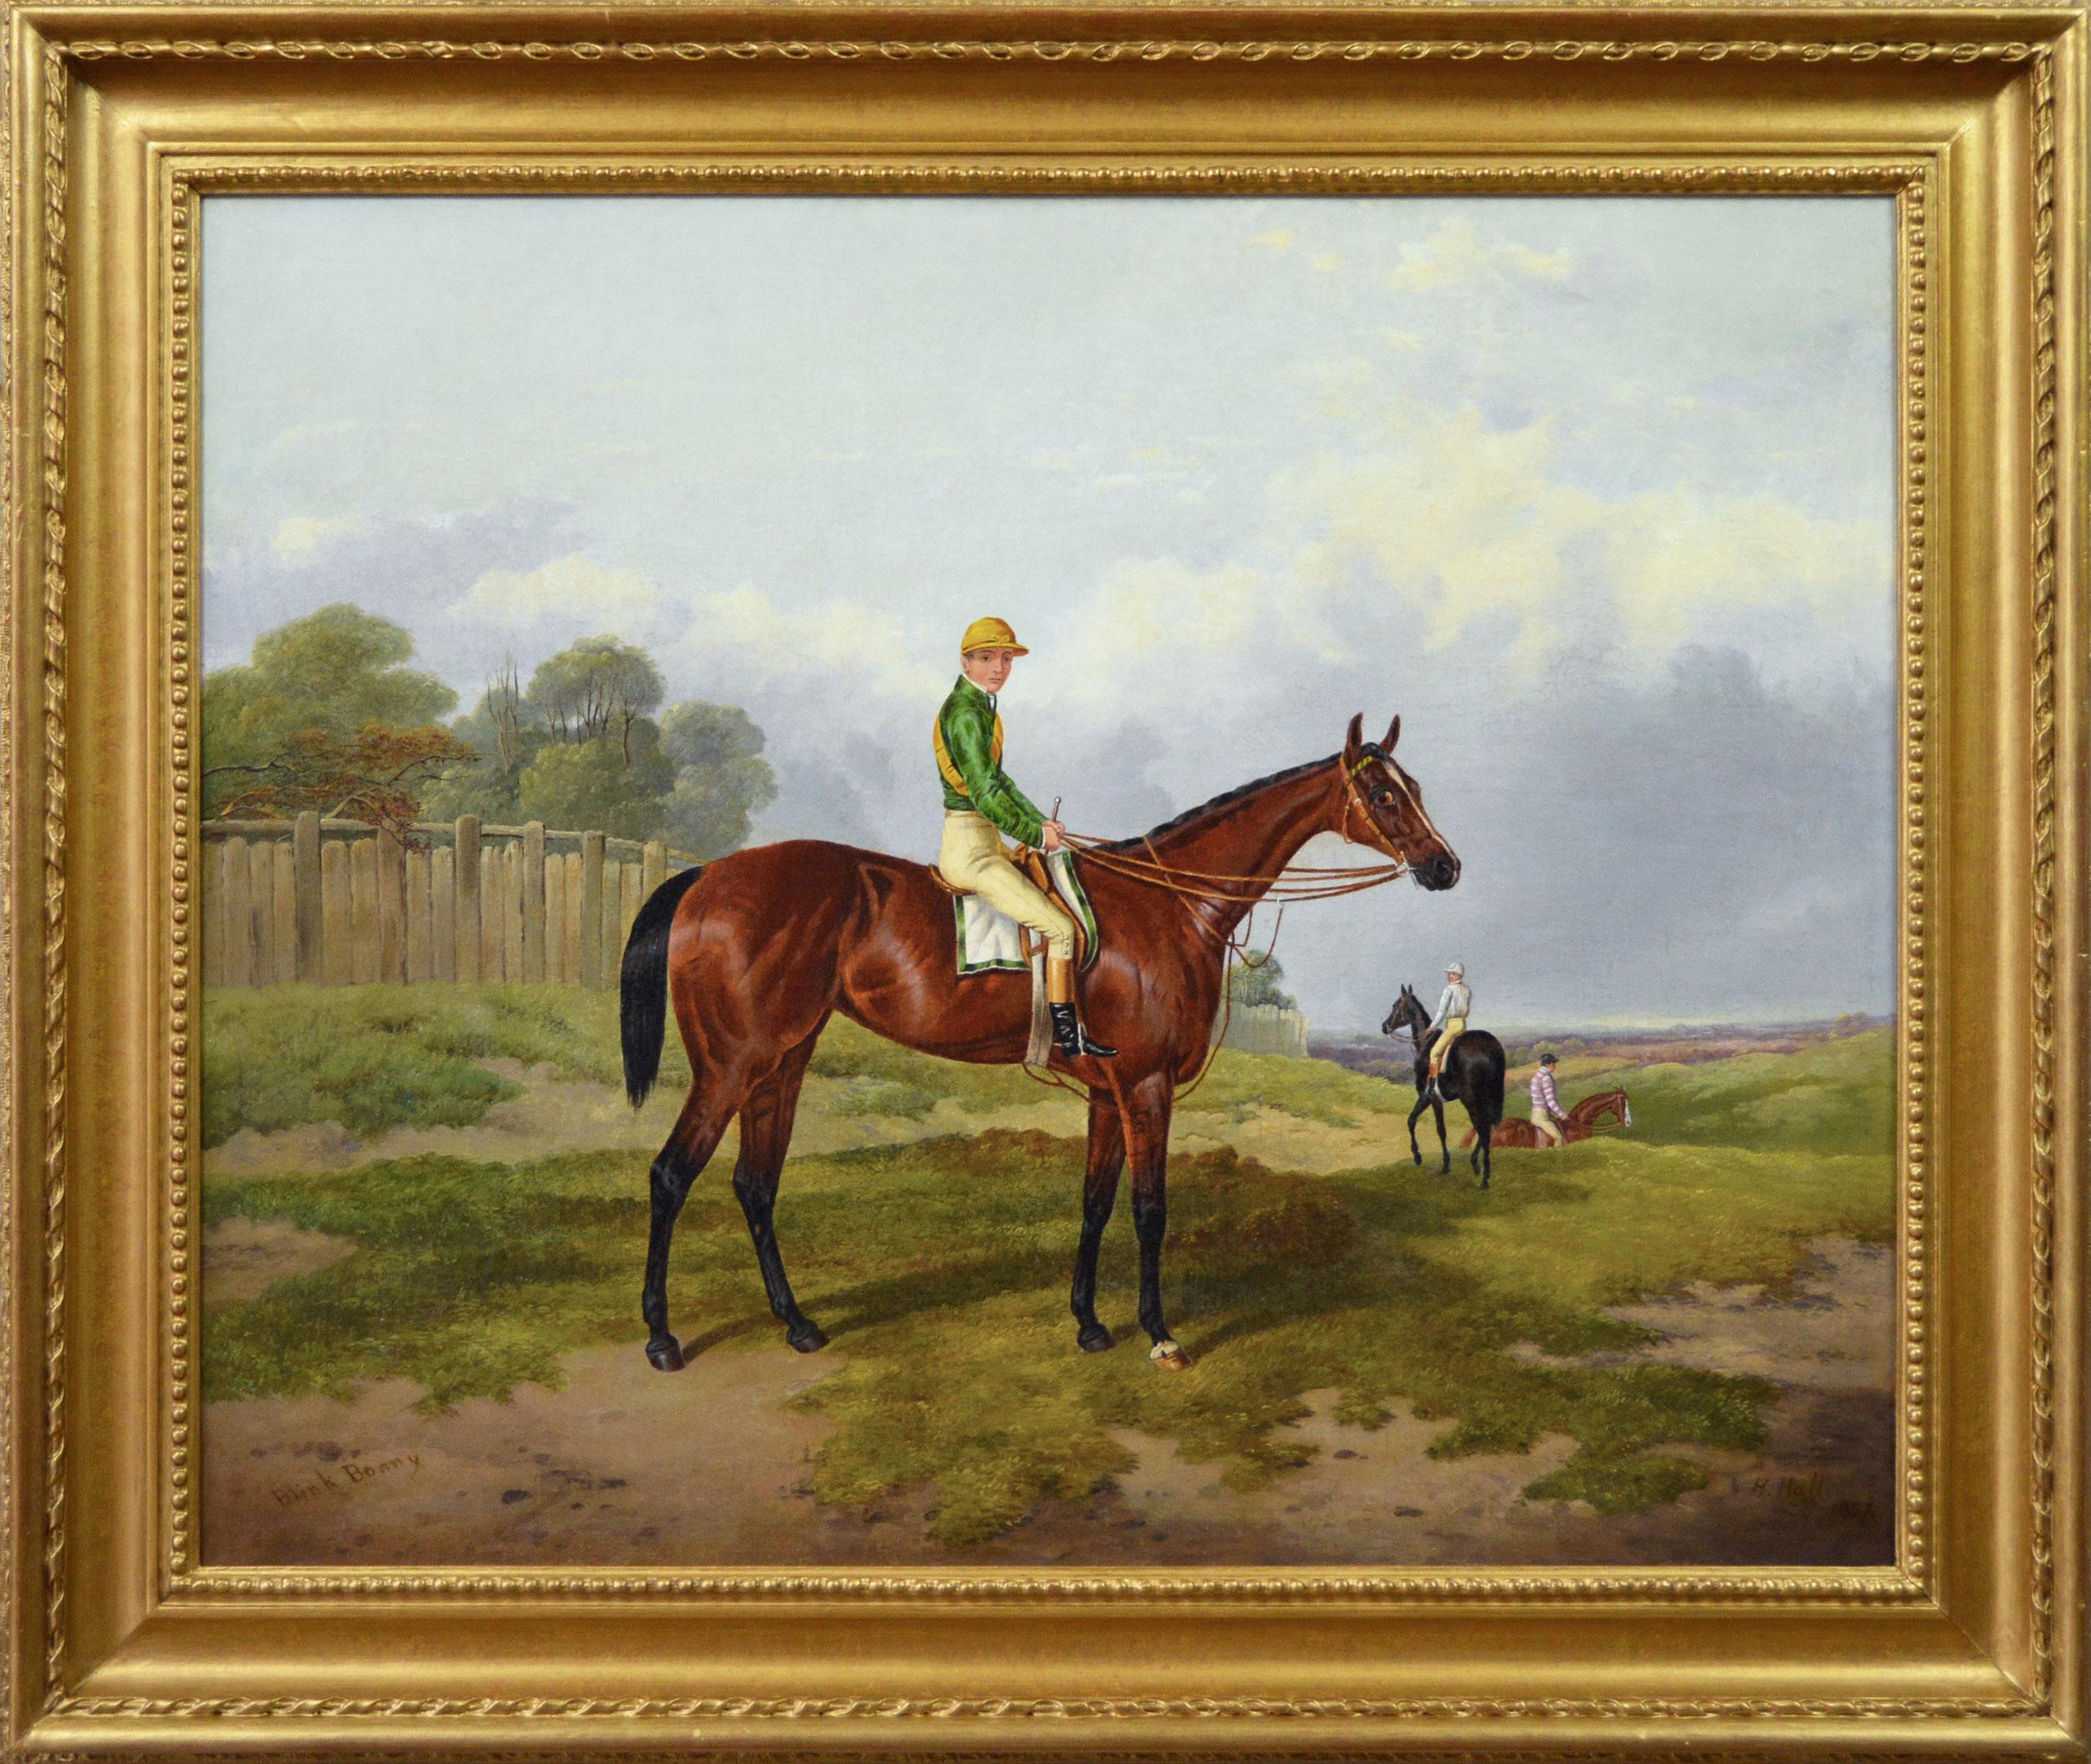 Harry Hall Animal Painting - 19th Century sporting horse portrait oil painting of the racehorse Blink Bonny